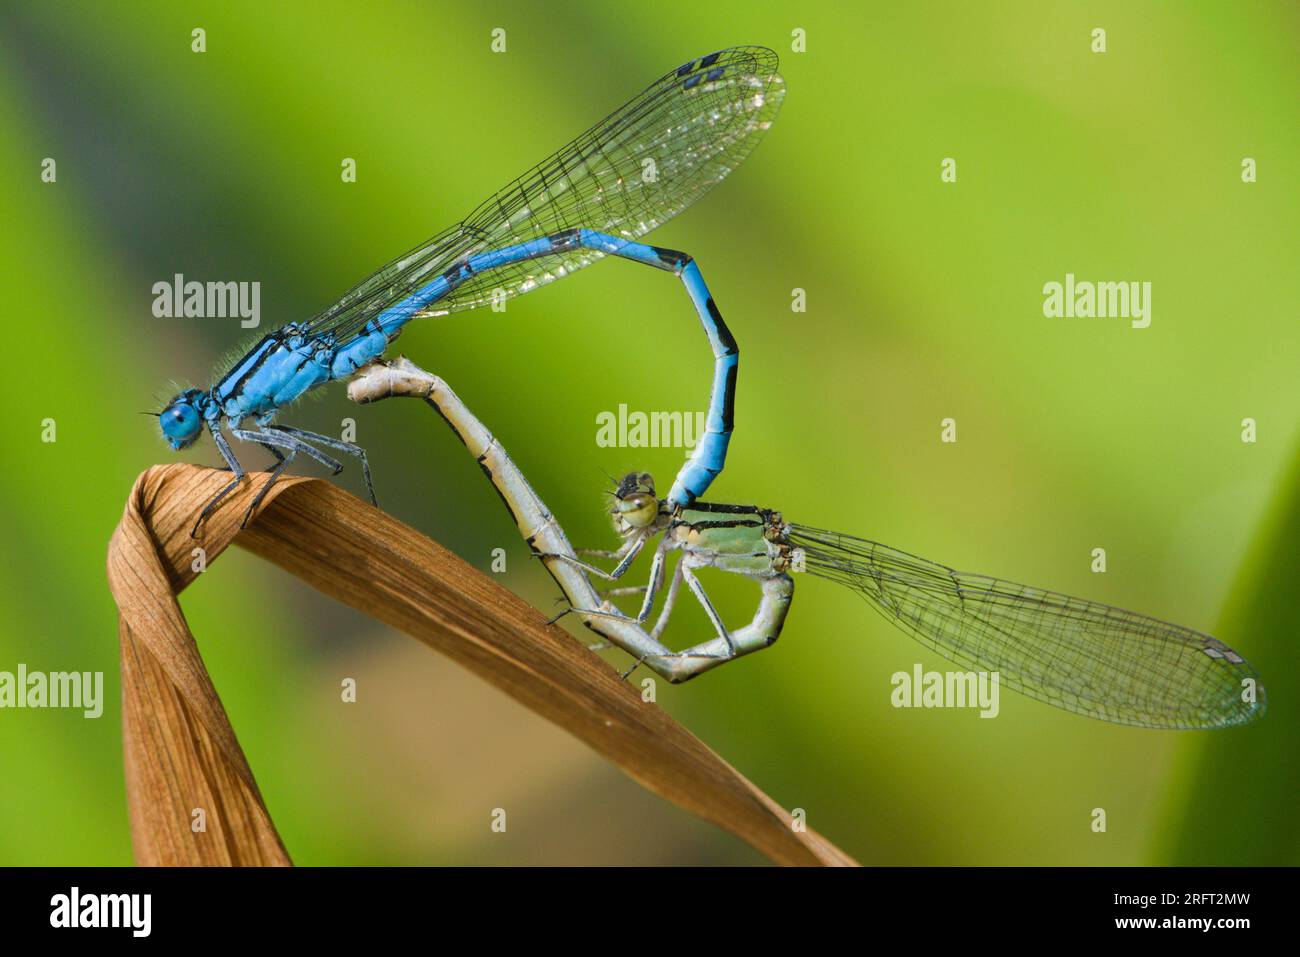 Coenagrion puella aka azure damselfly mating on the dry leaf above the pond. Czech republic nature. Male and female. Stock Photo